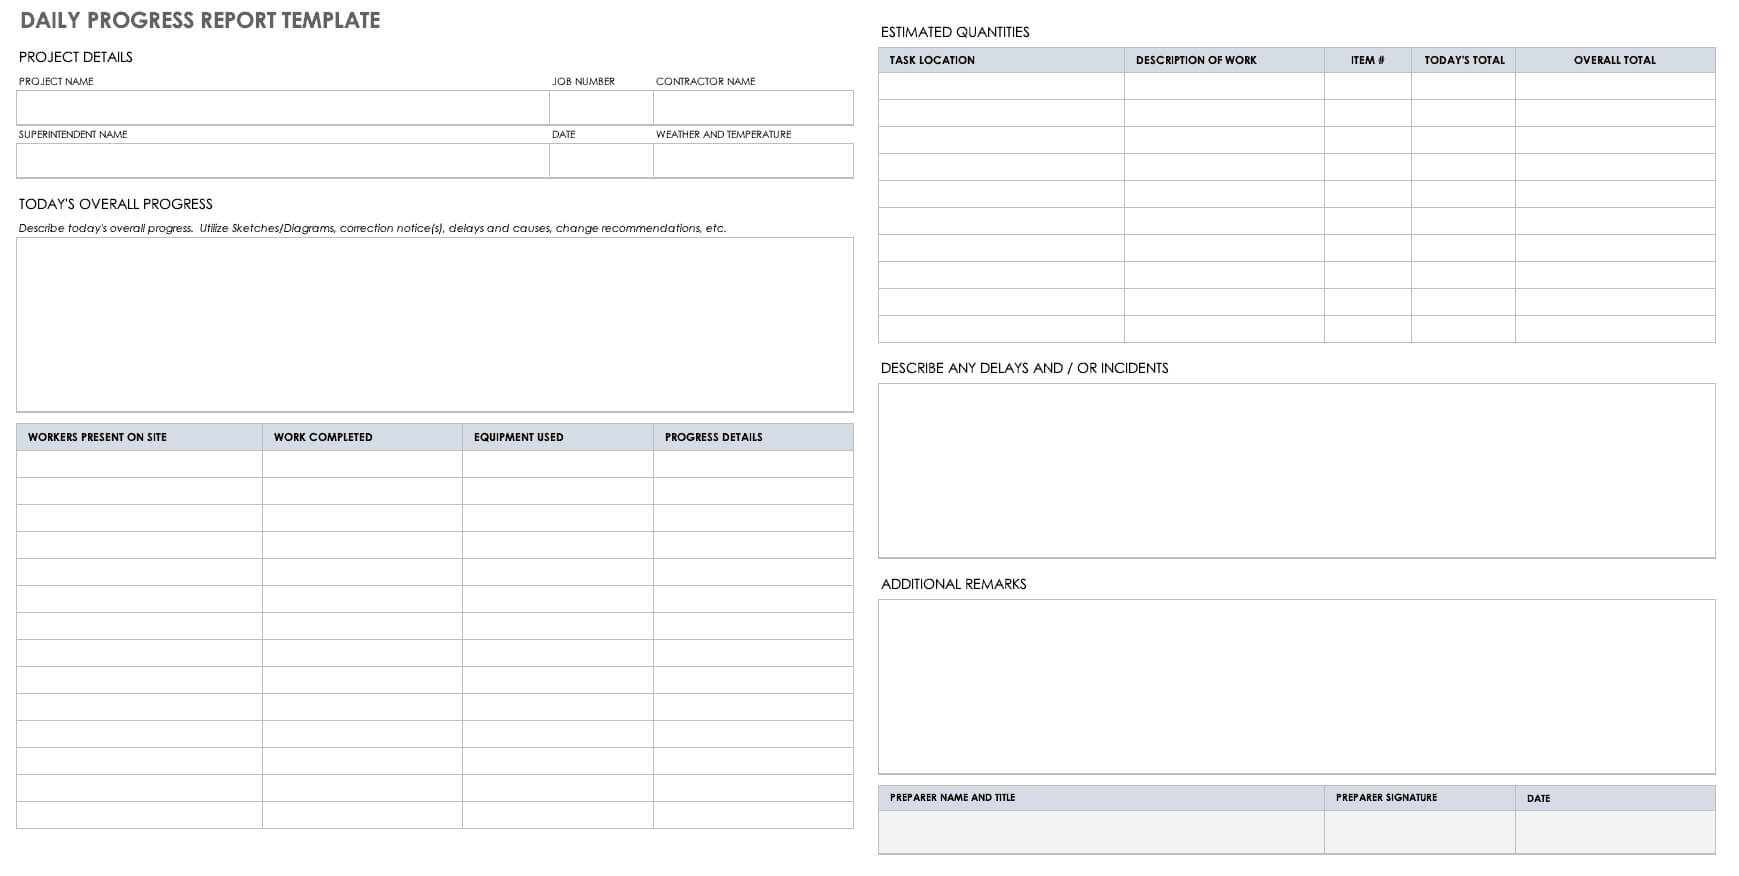 Free Project Report Templates | Smartsheet Within Monthly Activity Report Template